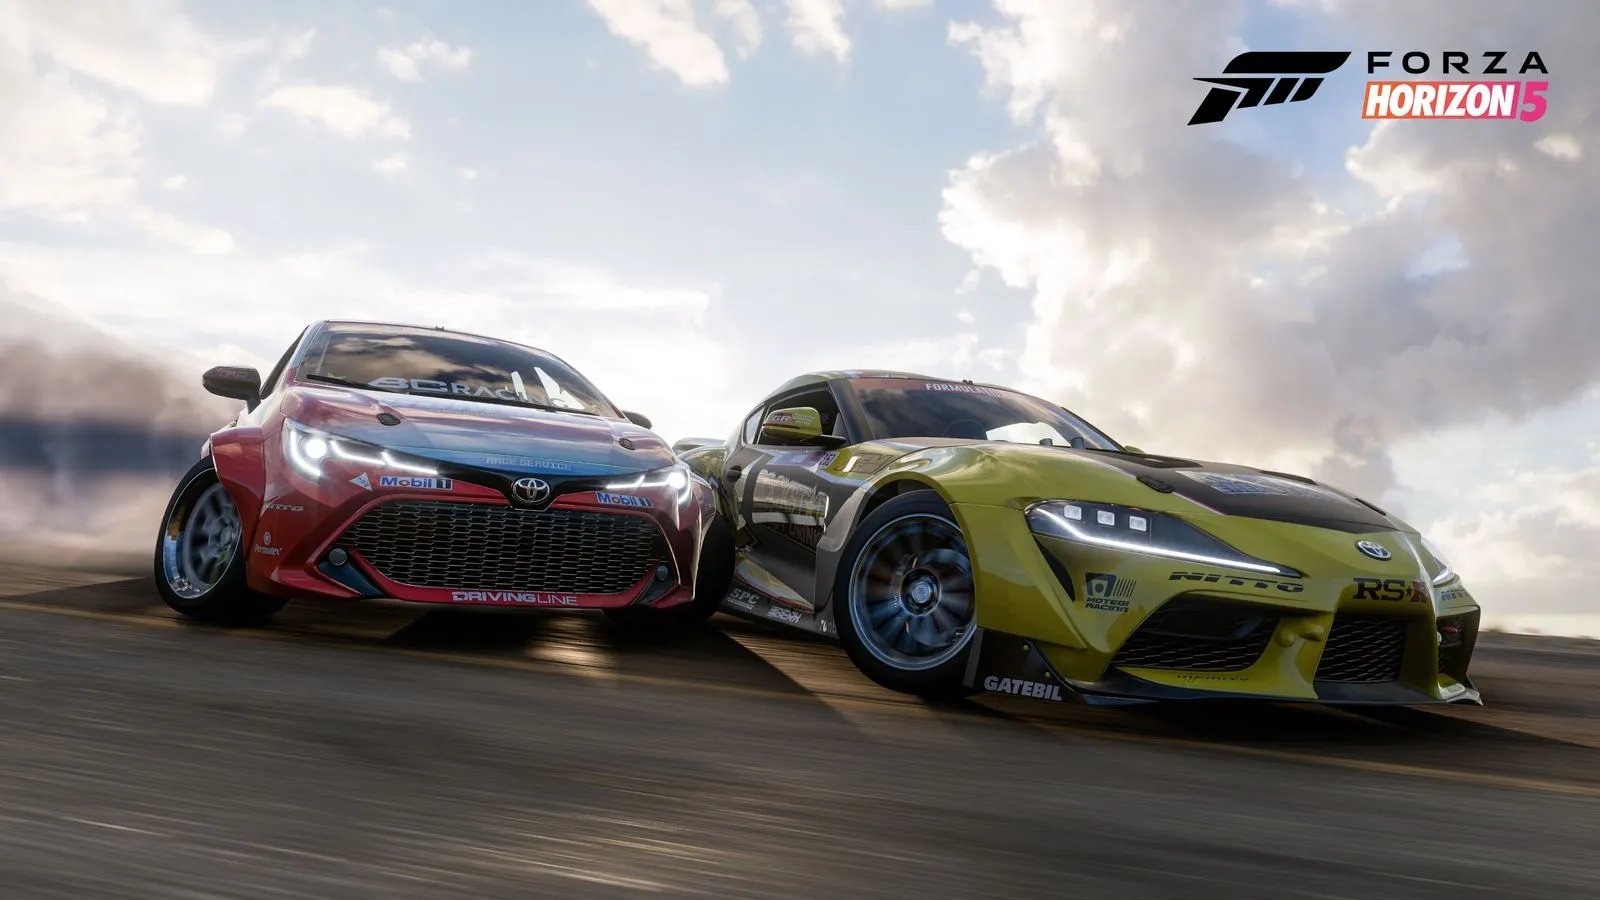 Forza Motorsport Launches in Spring 2023